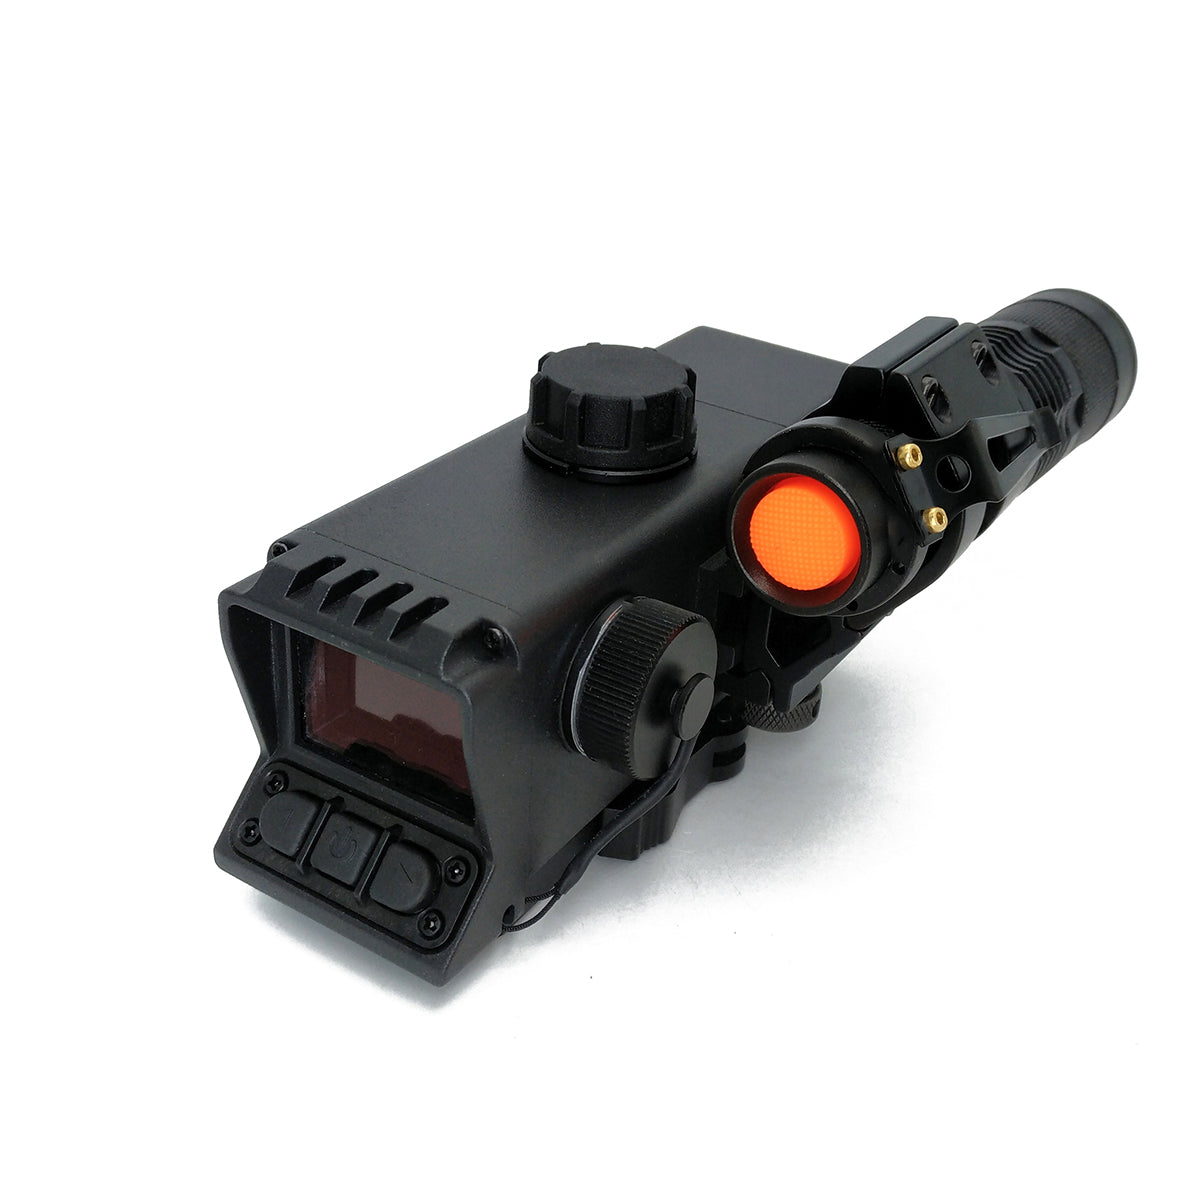 2022 New Design TRD10PRO Infrared Digital Night Vision Optical Riflescope Gun Sight Scope 6X Zoom Tactical Night Vision Device for Hunting Shotting